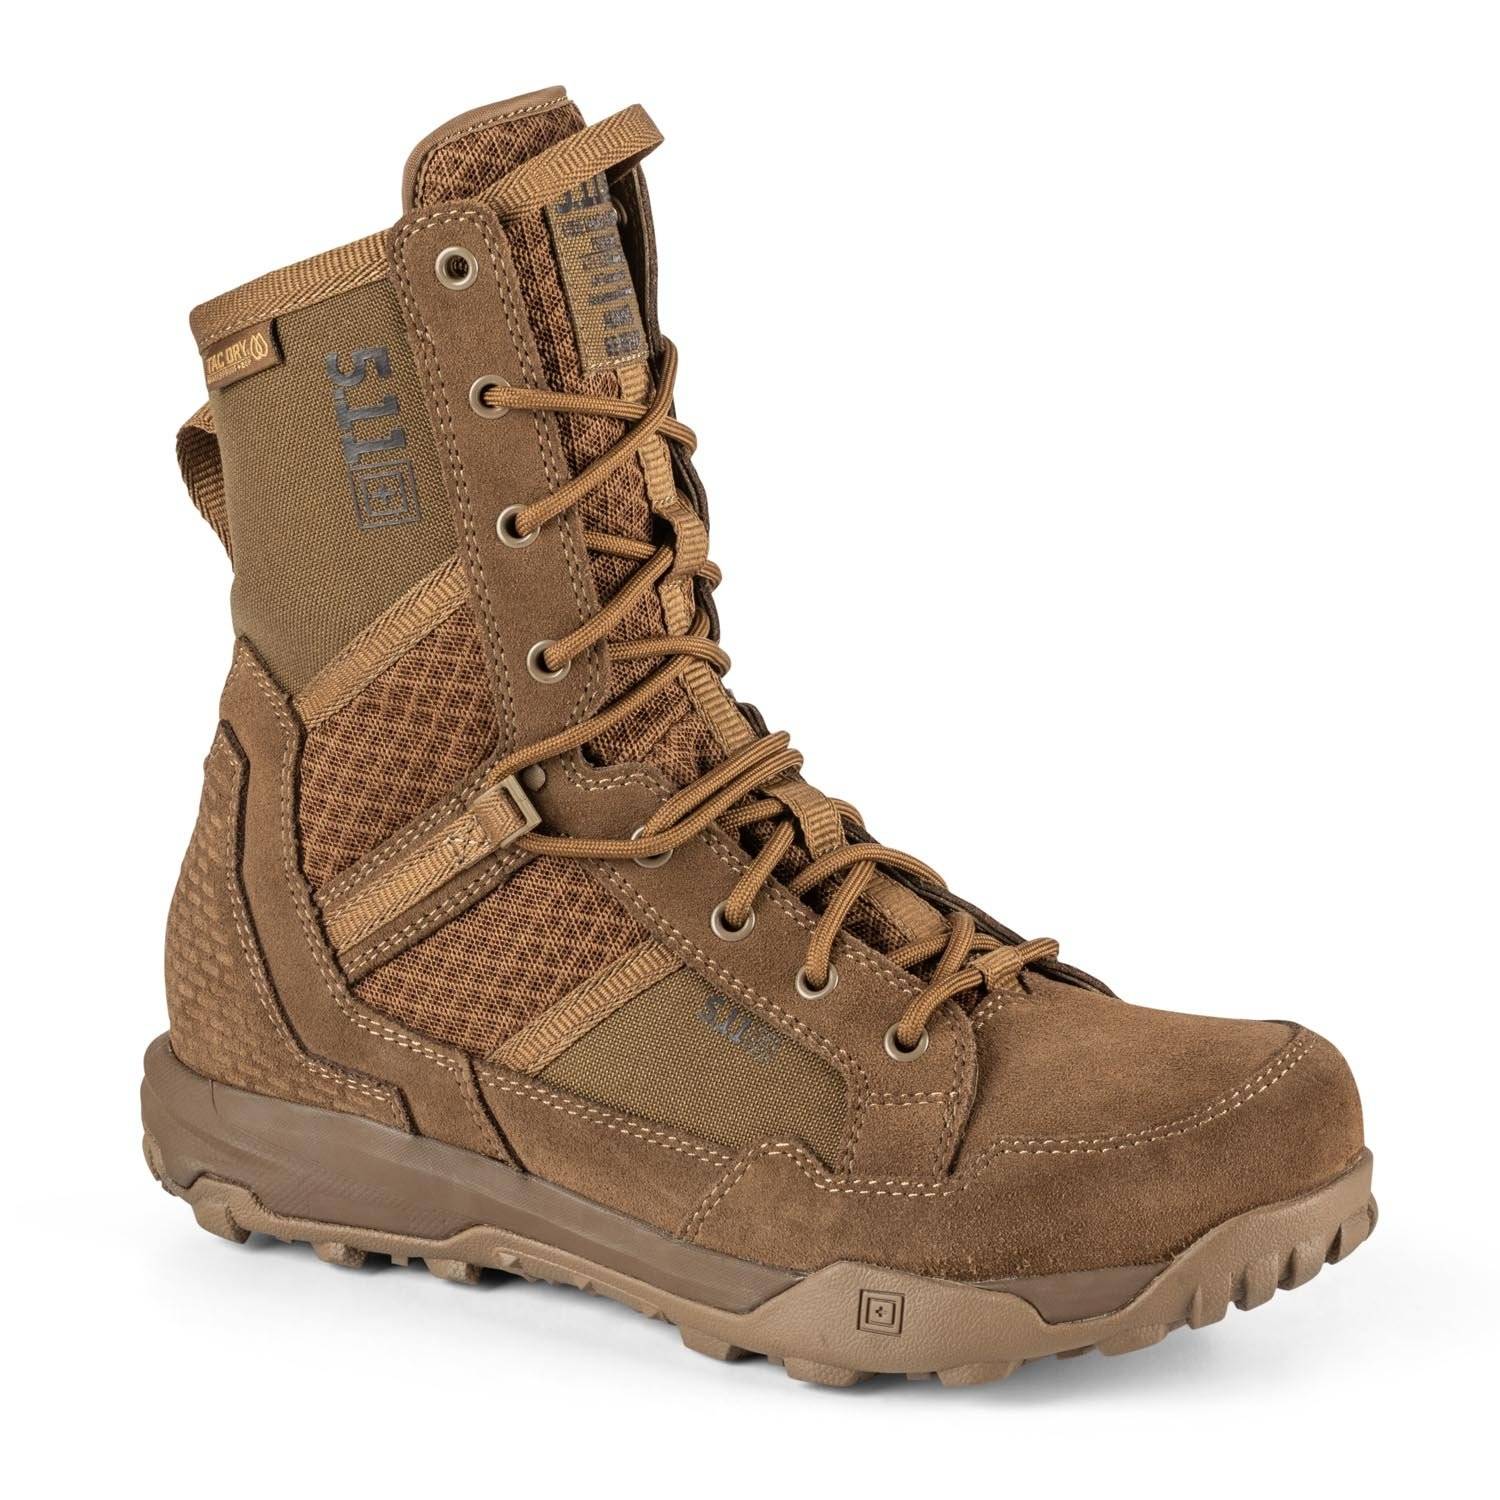 5.11 Tactical A/T 8" Waterproof Boots